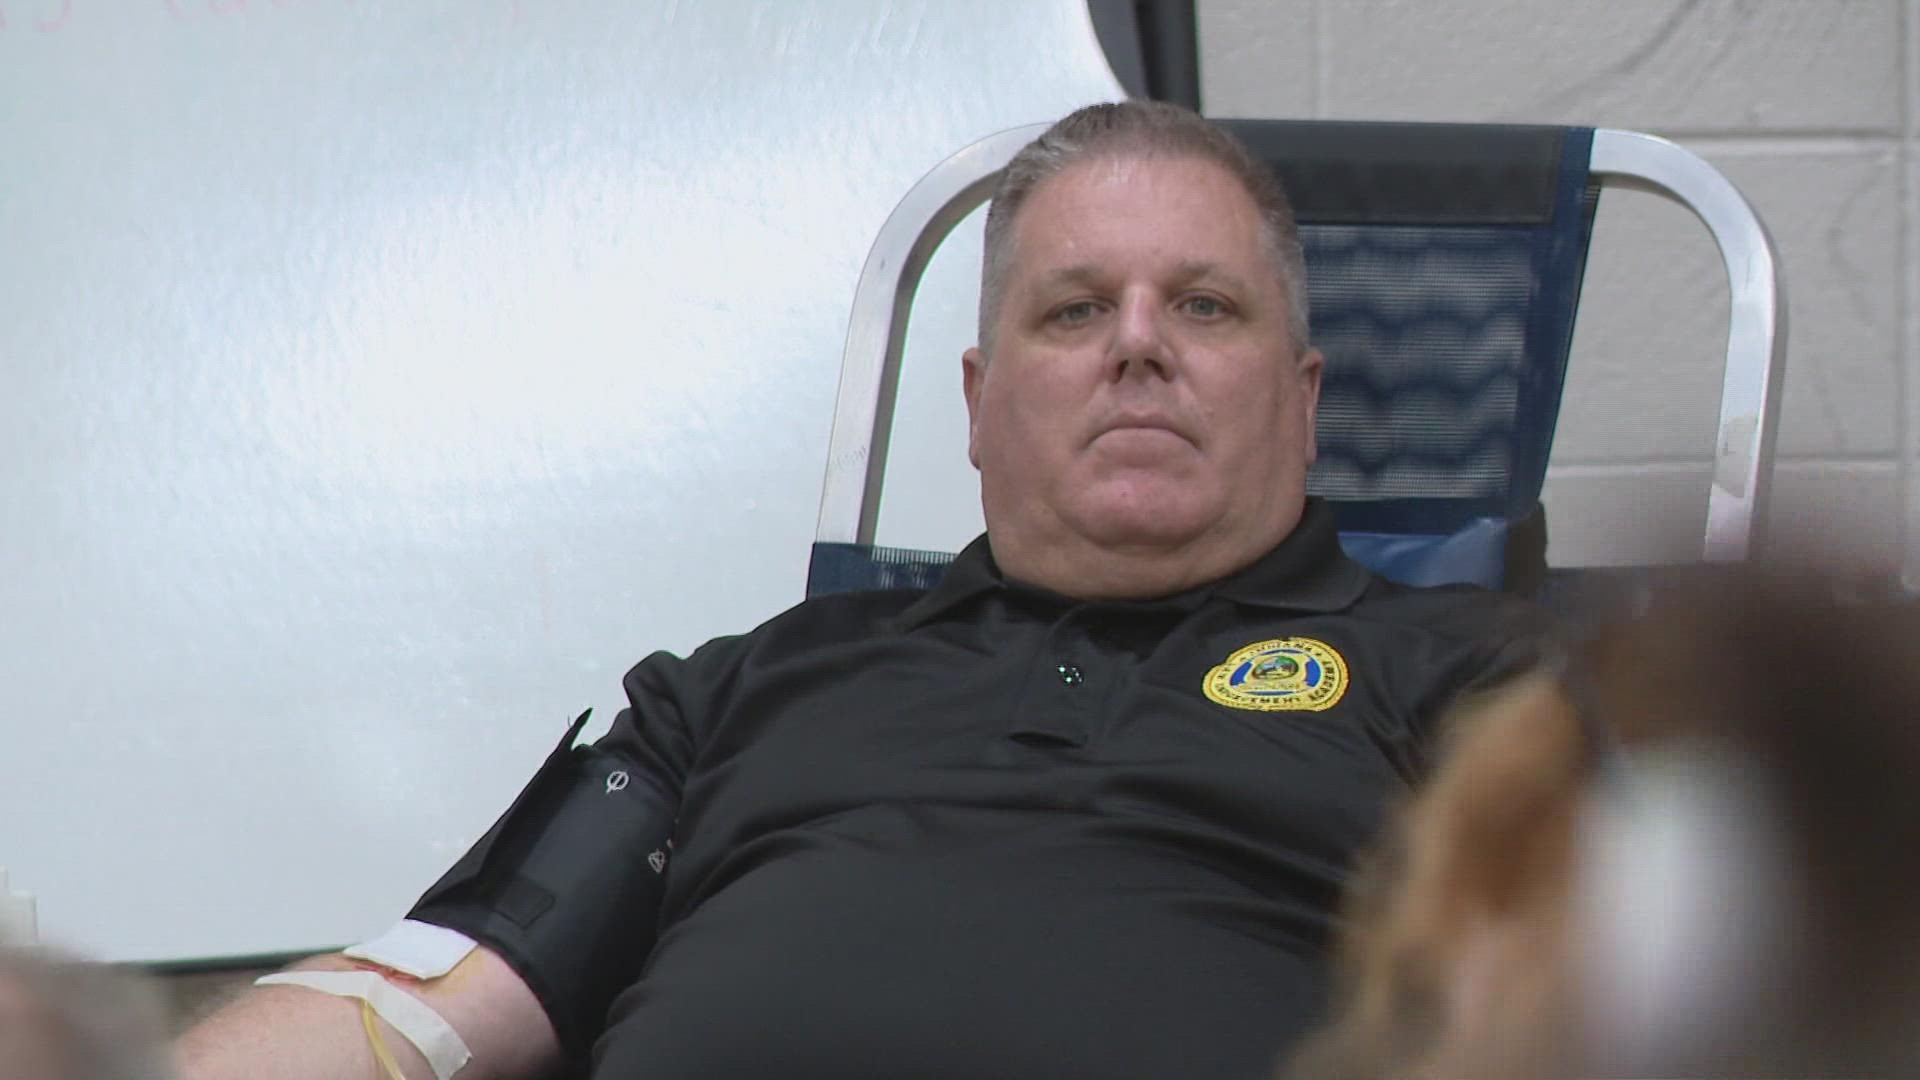 The blood drive was held in their honor, as well as the memory of other fallen officers, at the Indiana Law Enforcement Academy in Plainfield.